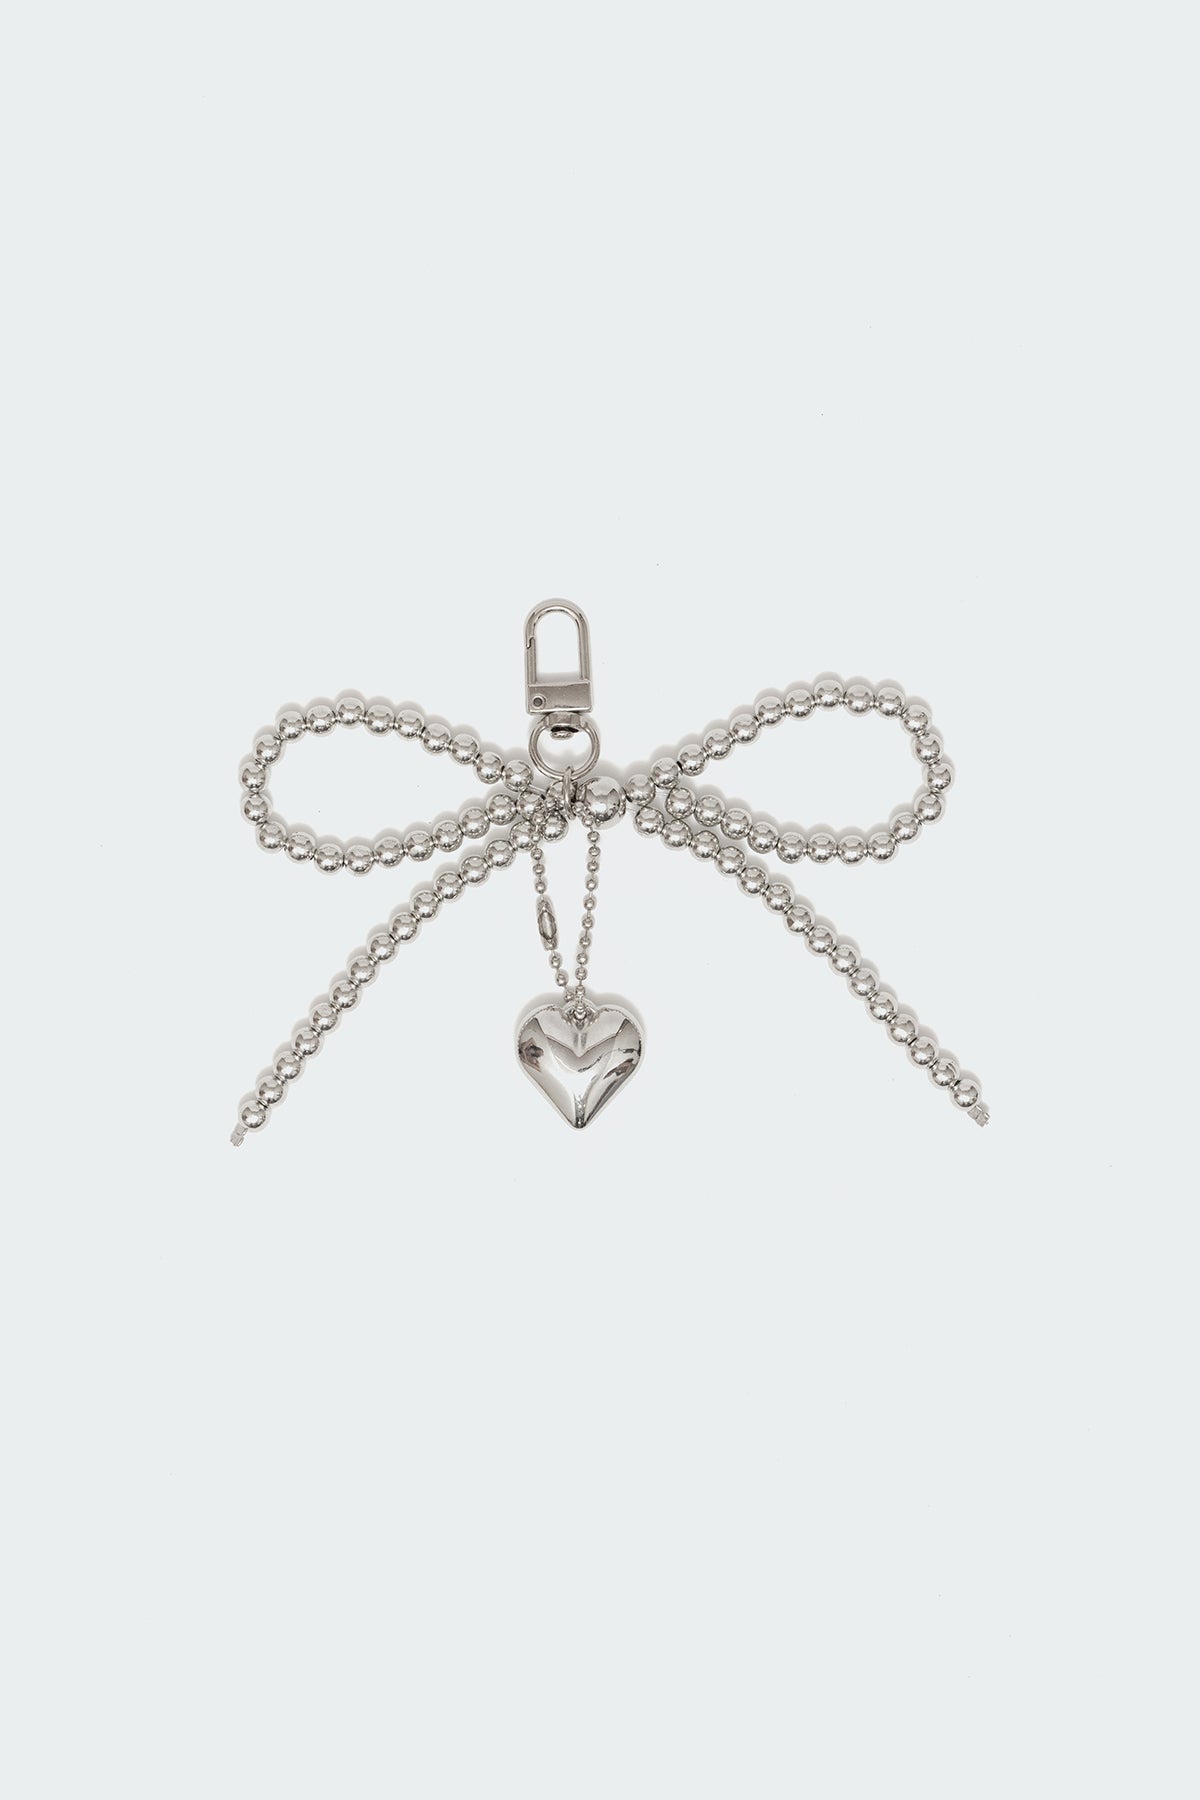 Tied Up Heart Purse Charm